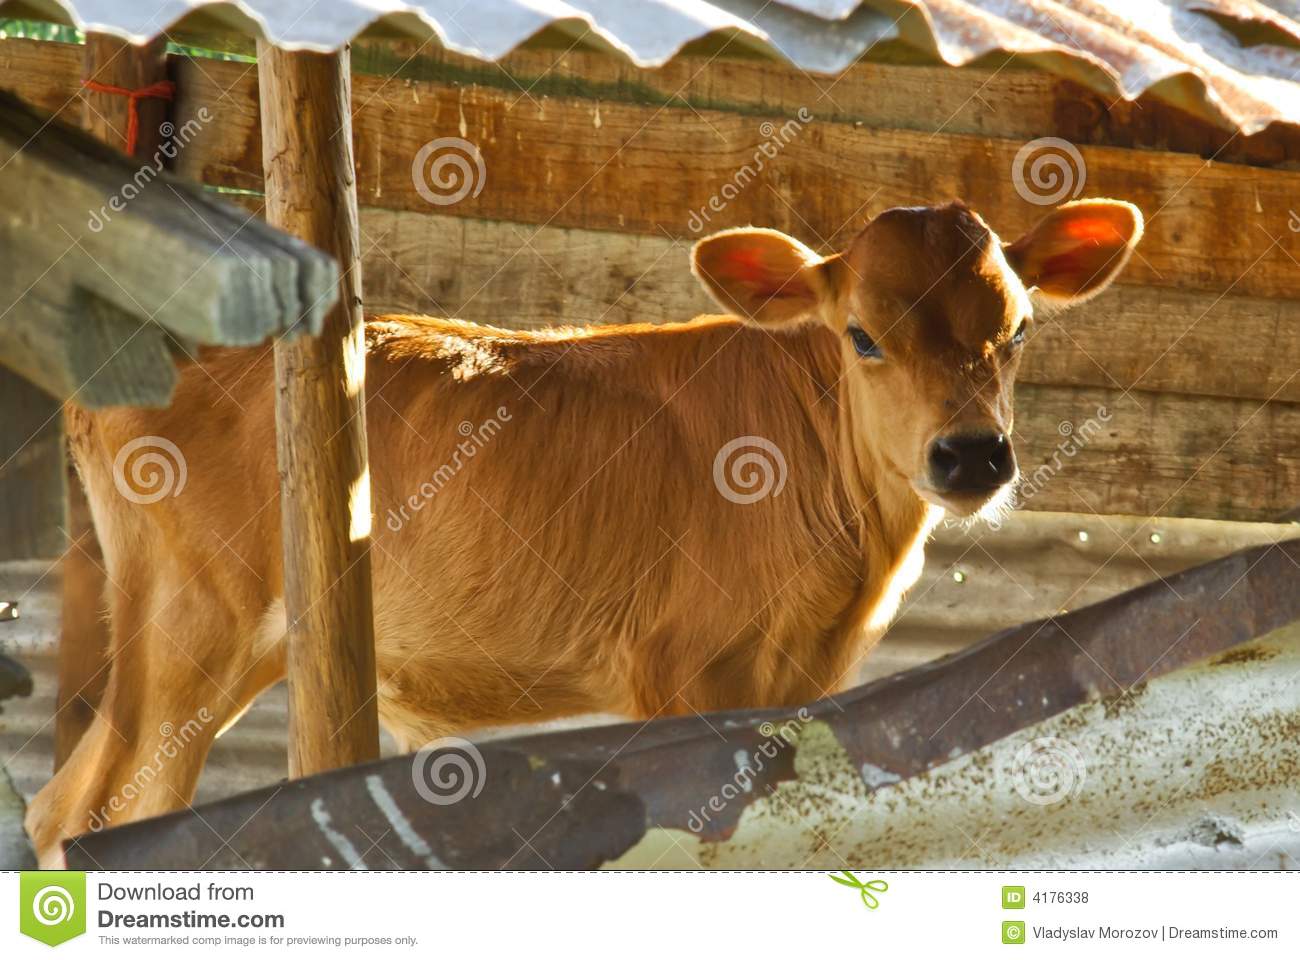 Baby Cow   Calf In The Farm Royalty Free Stock Photos   Image  4176338